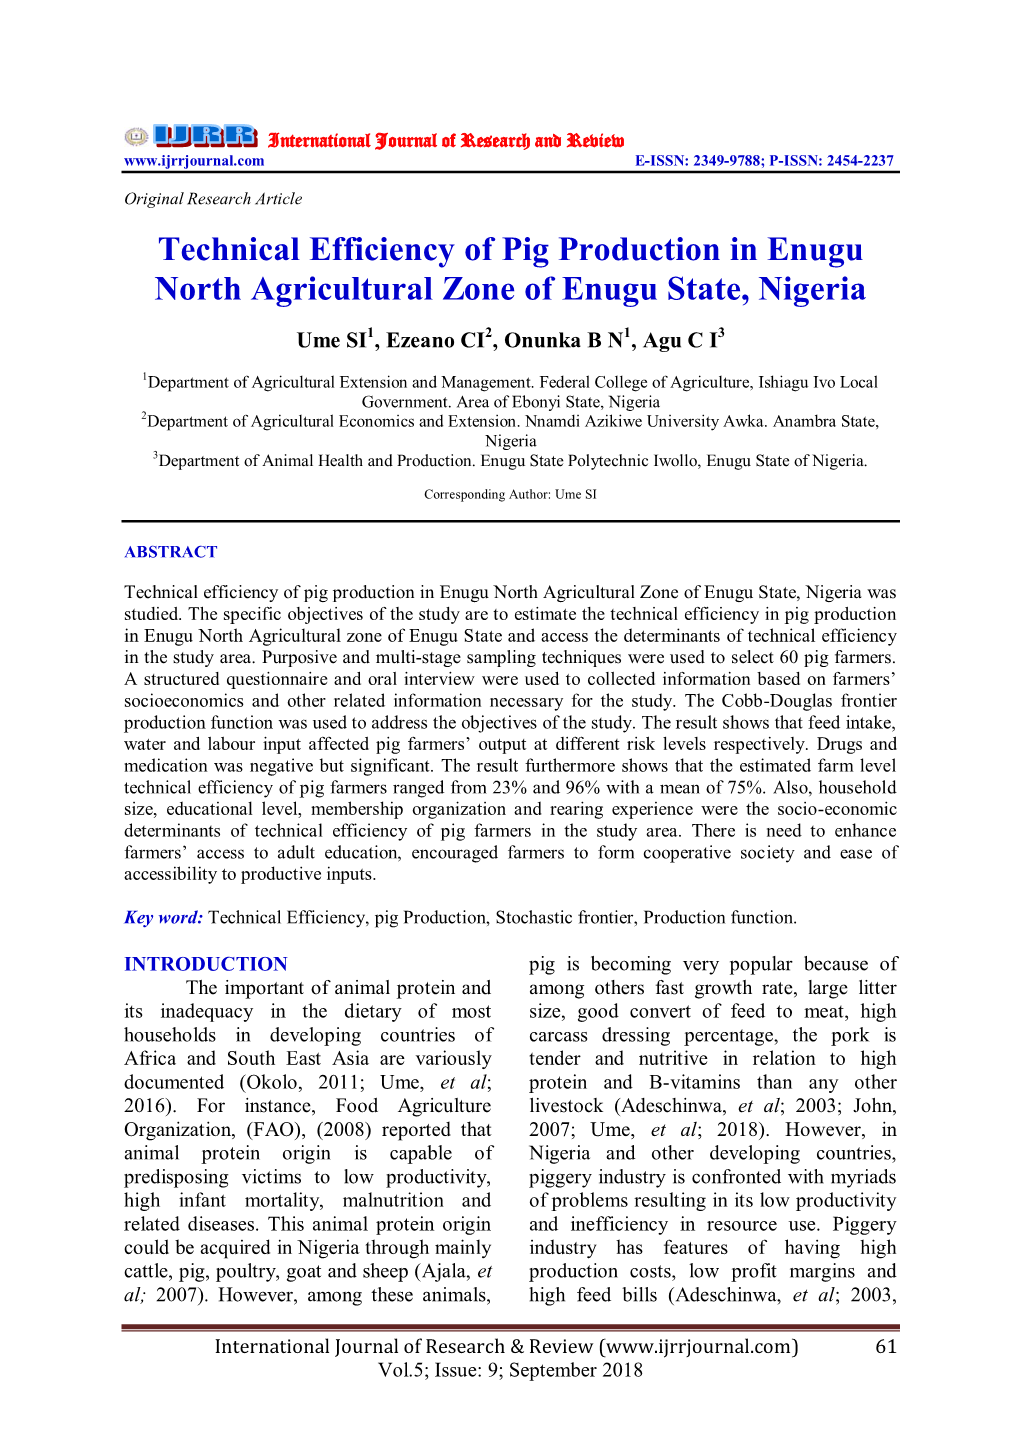 Technical Efficiency of Pig Production in Enugu North Agricultural Zone of Enugu State, Nigeria